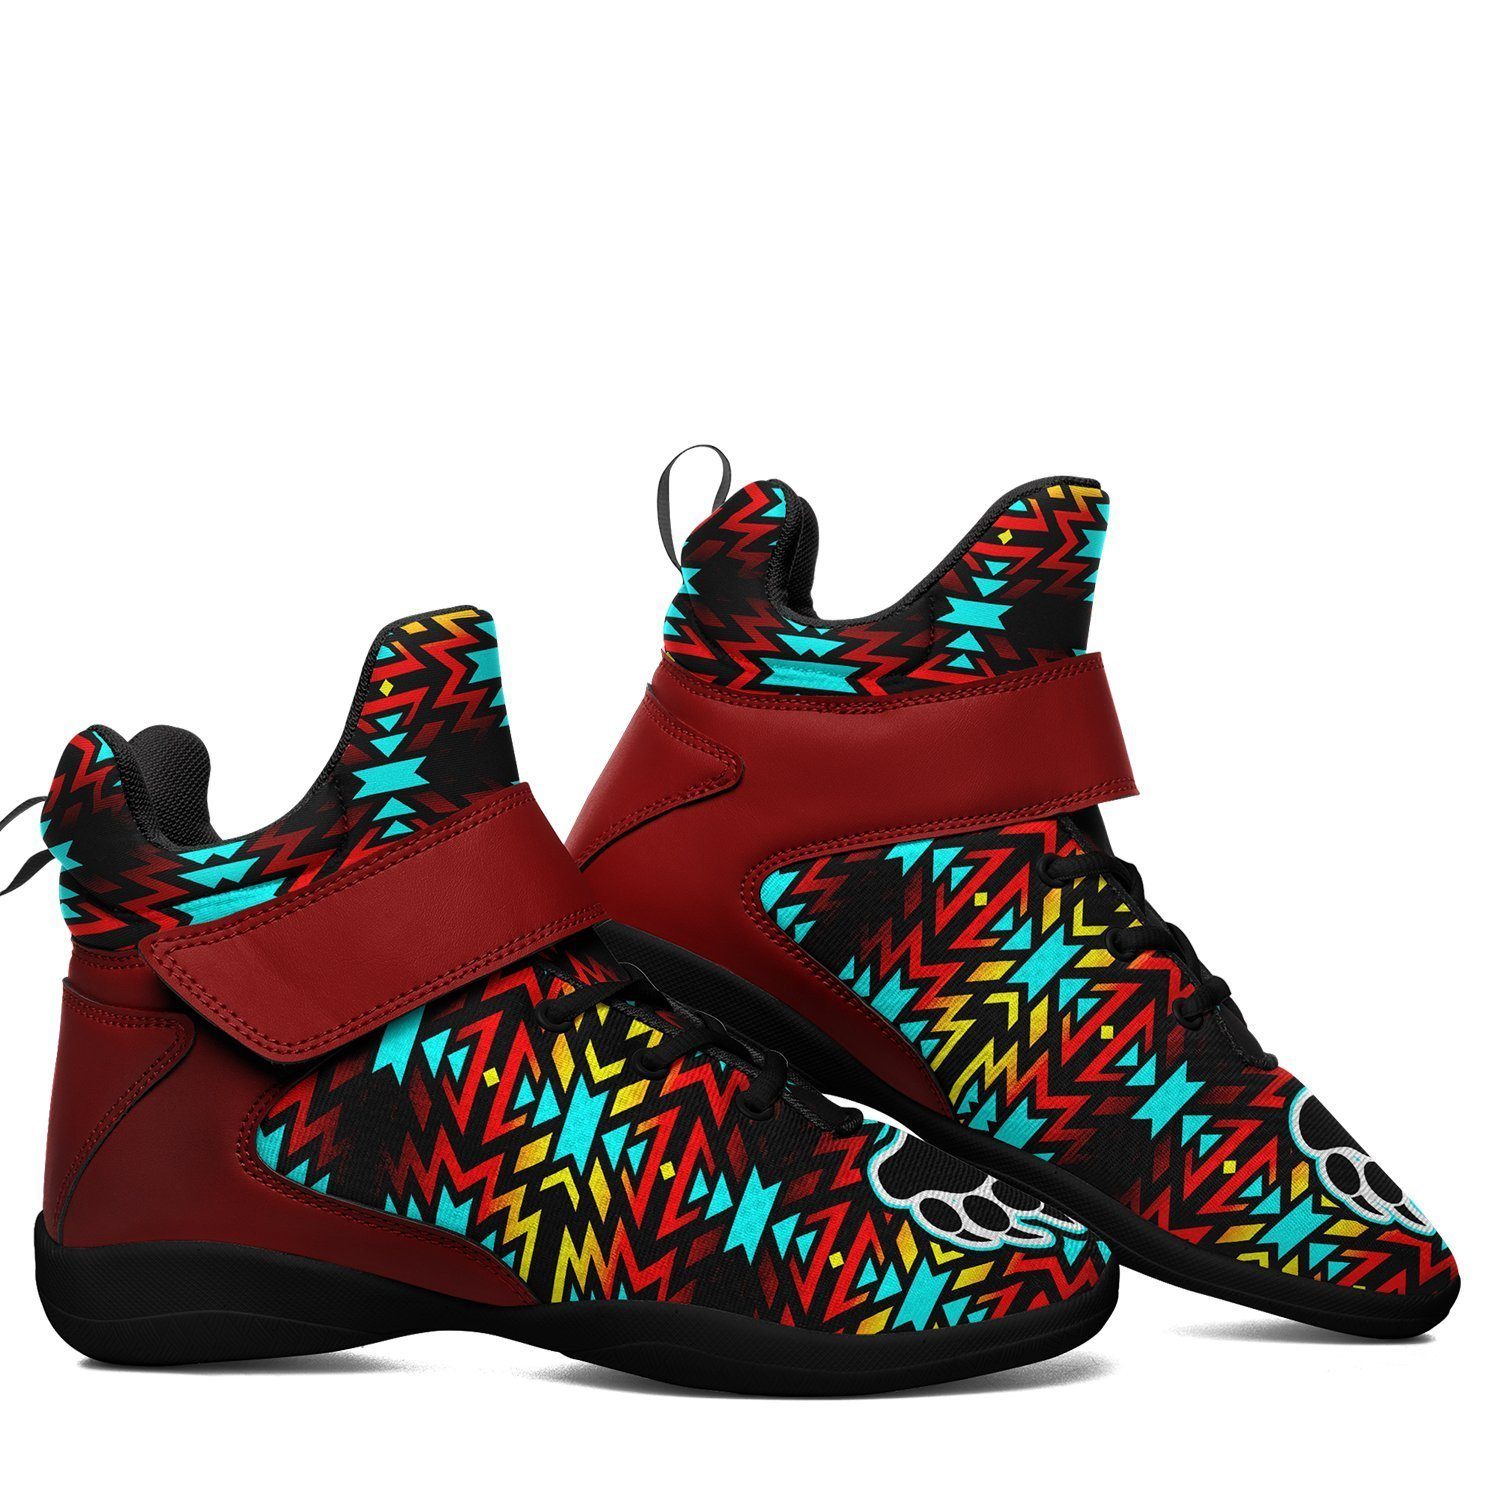 Fire Colors and Turquoise Bearpaw Ipottaa Basketball / Sport High Top Shoes - Black Sole 49 Dzine 